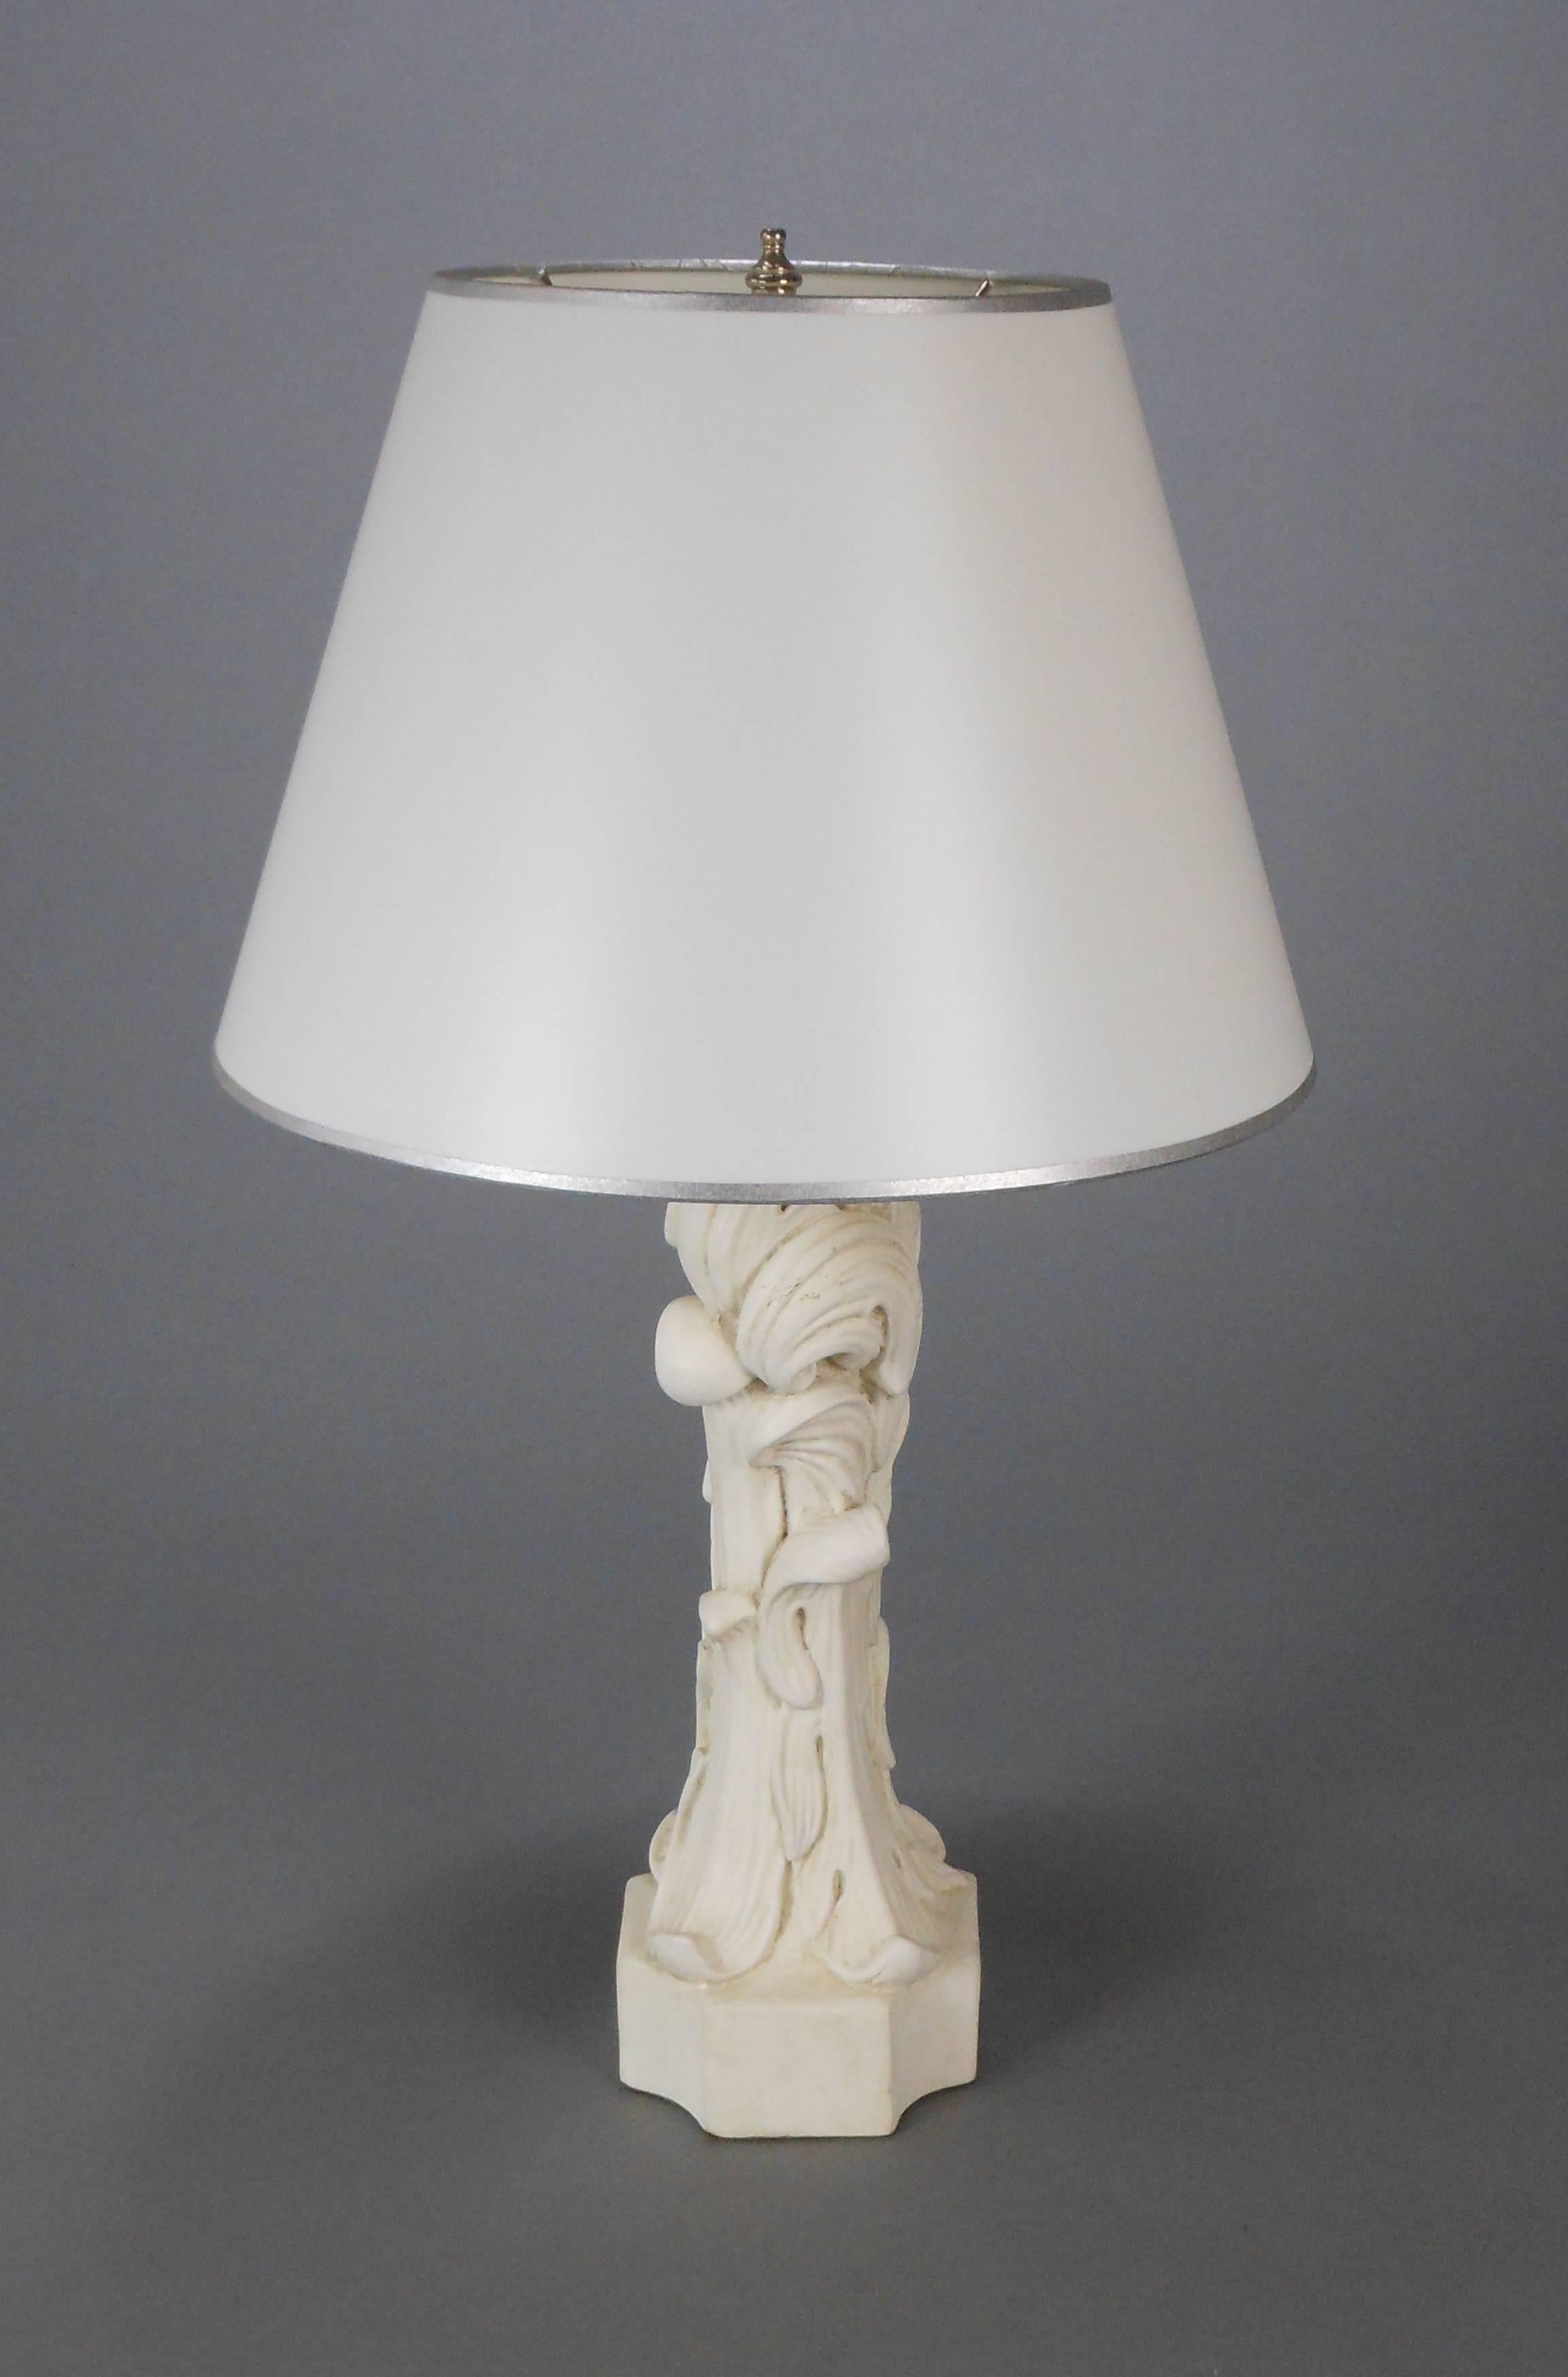 Each in the form of scrolling acanthus leaves on a square base with concave corners.

Height to base of light socket: 15.5